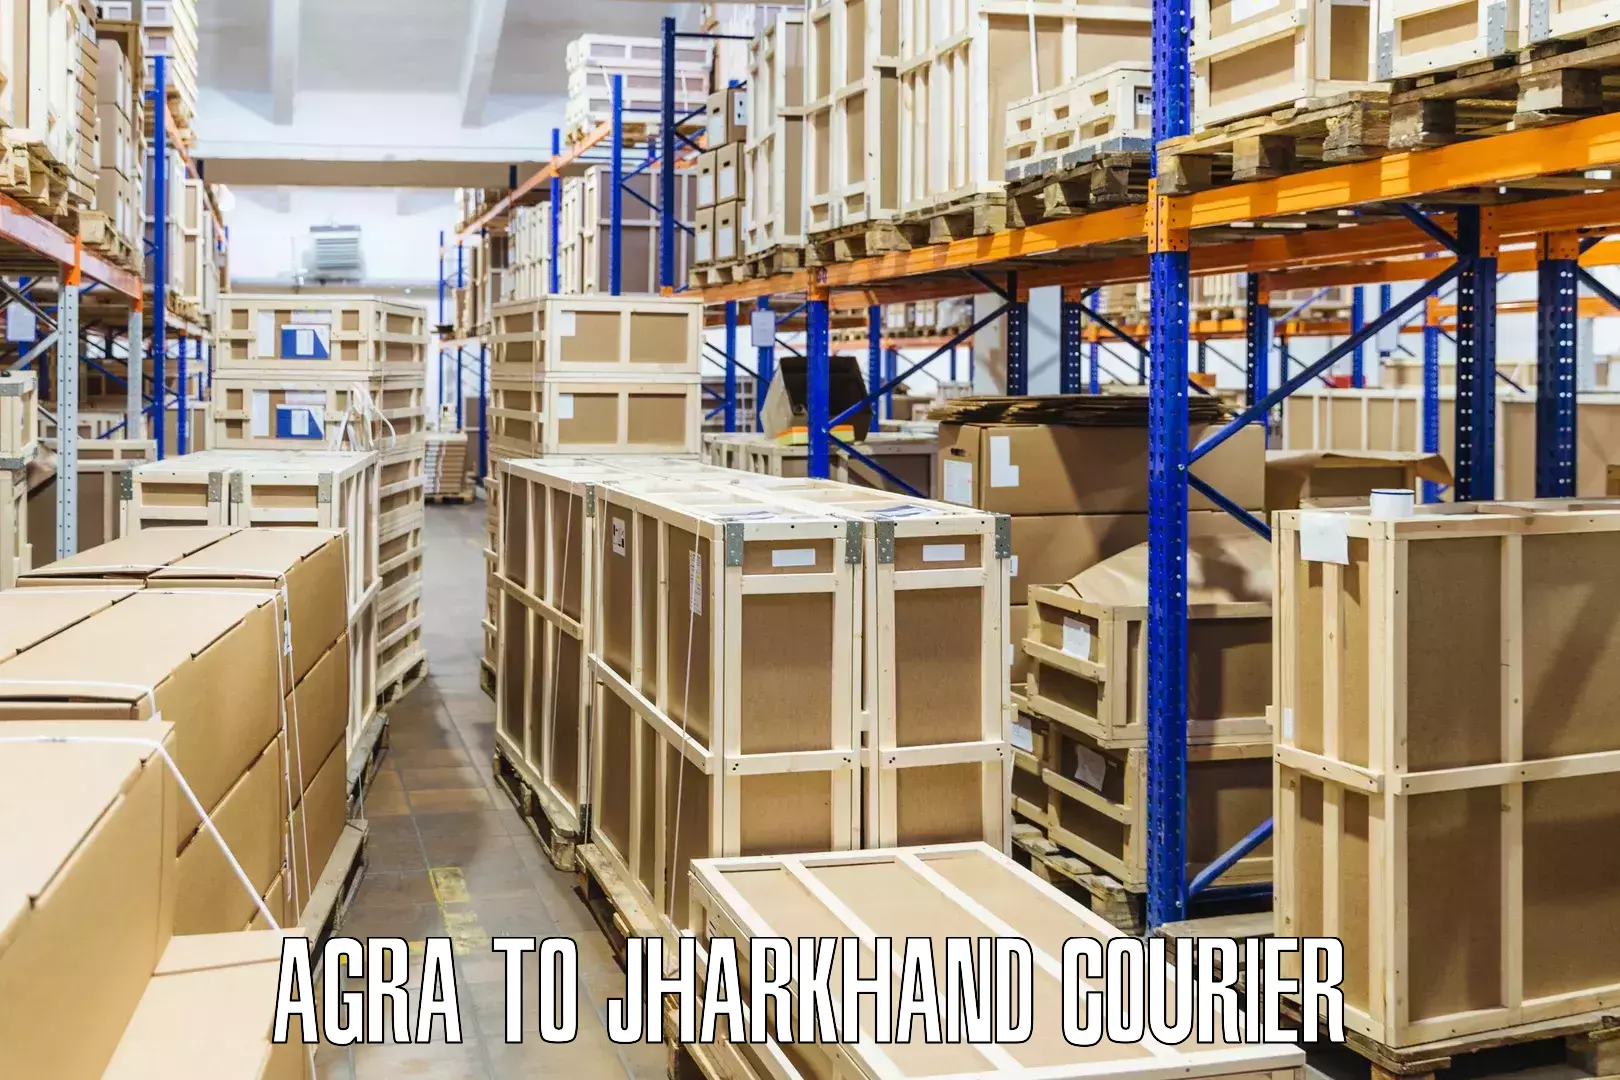 International courier networks Agra to Hariharganj